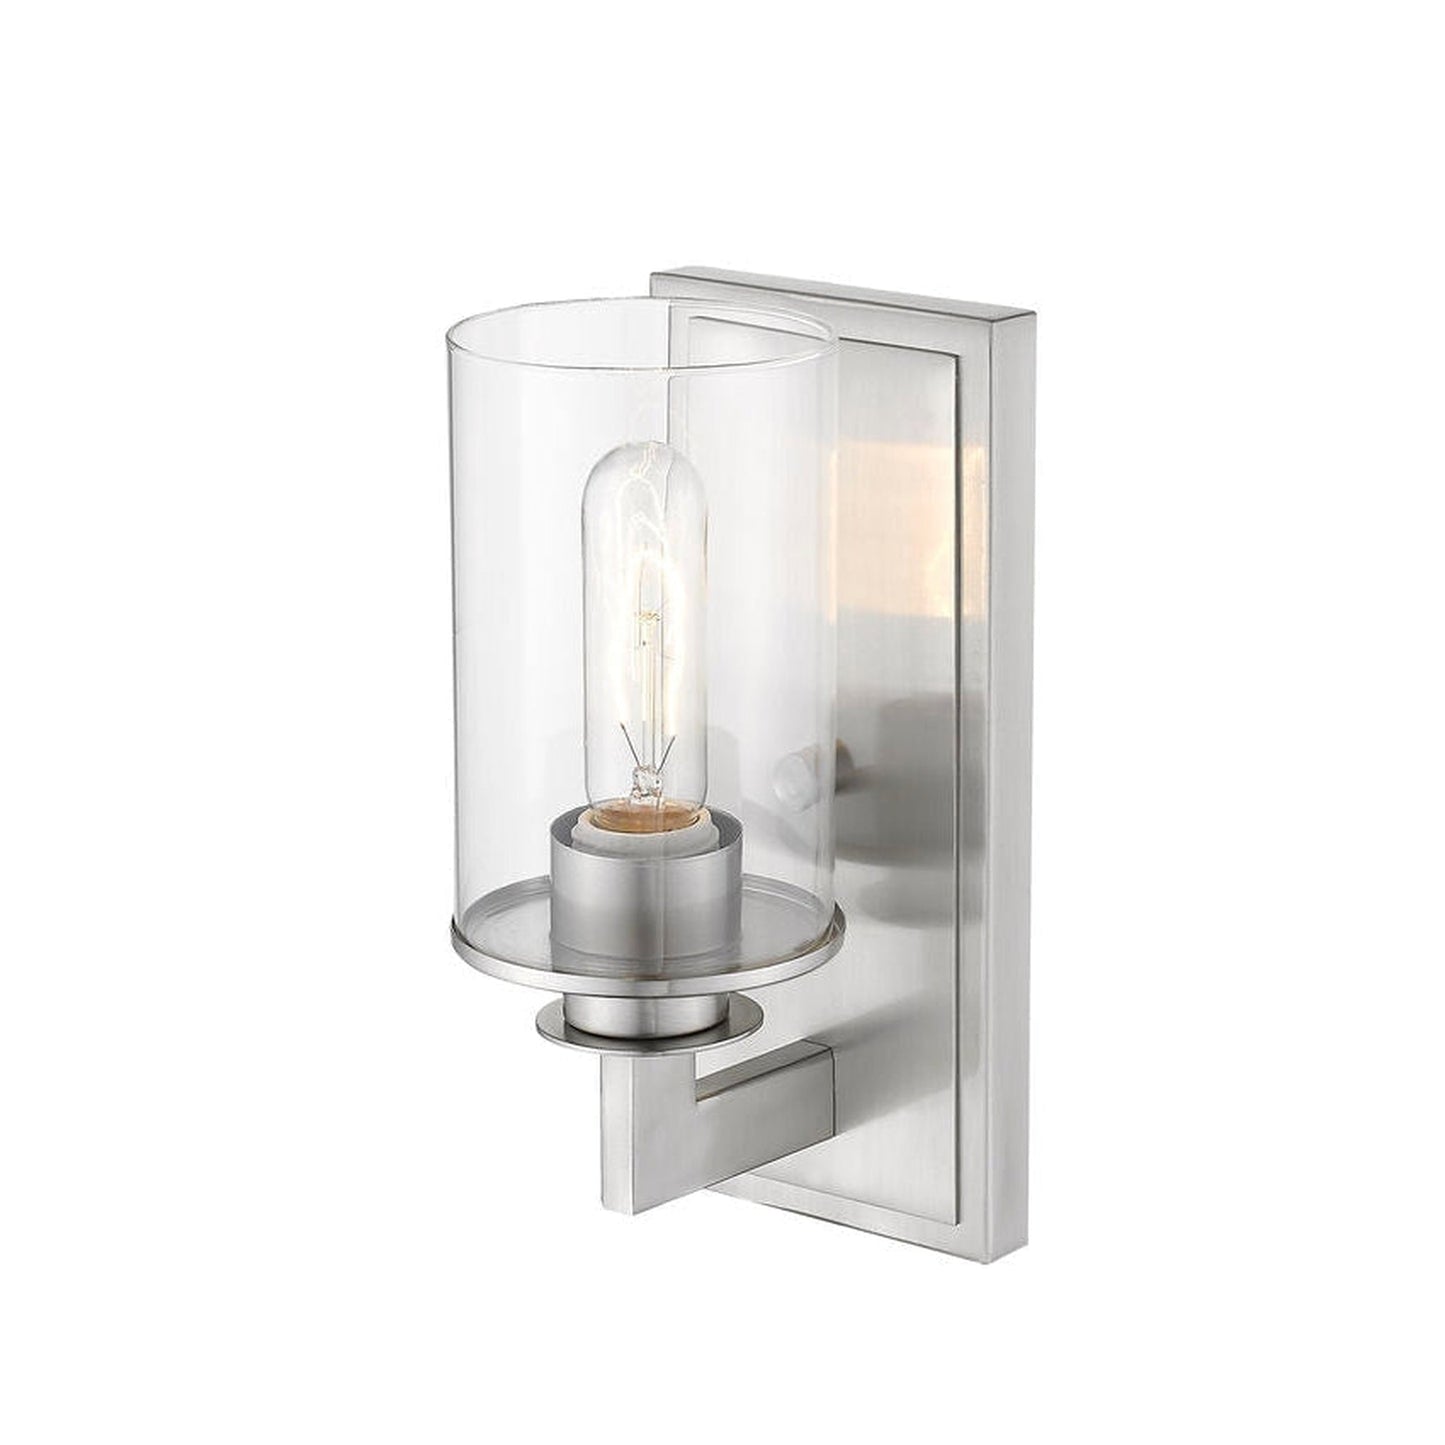 Z-Lite Savannah 5" 1-Light Brushed Nickel Wall Sconce With Clear Glass Shade